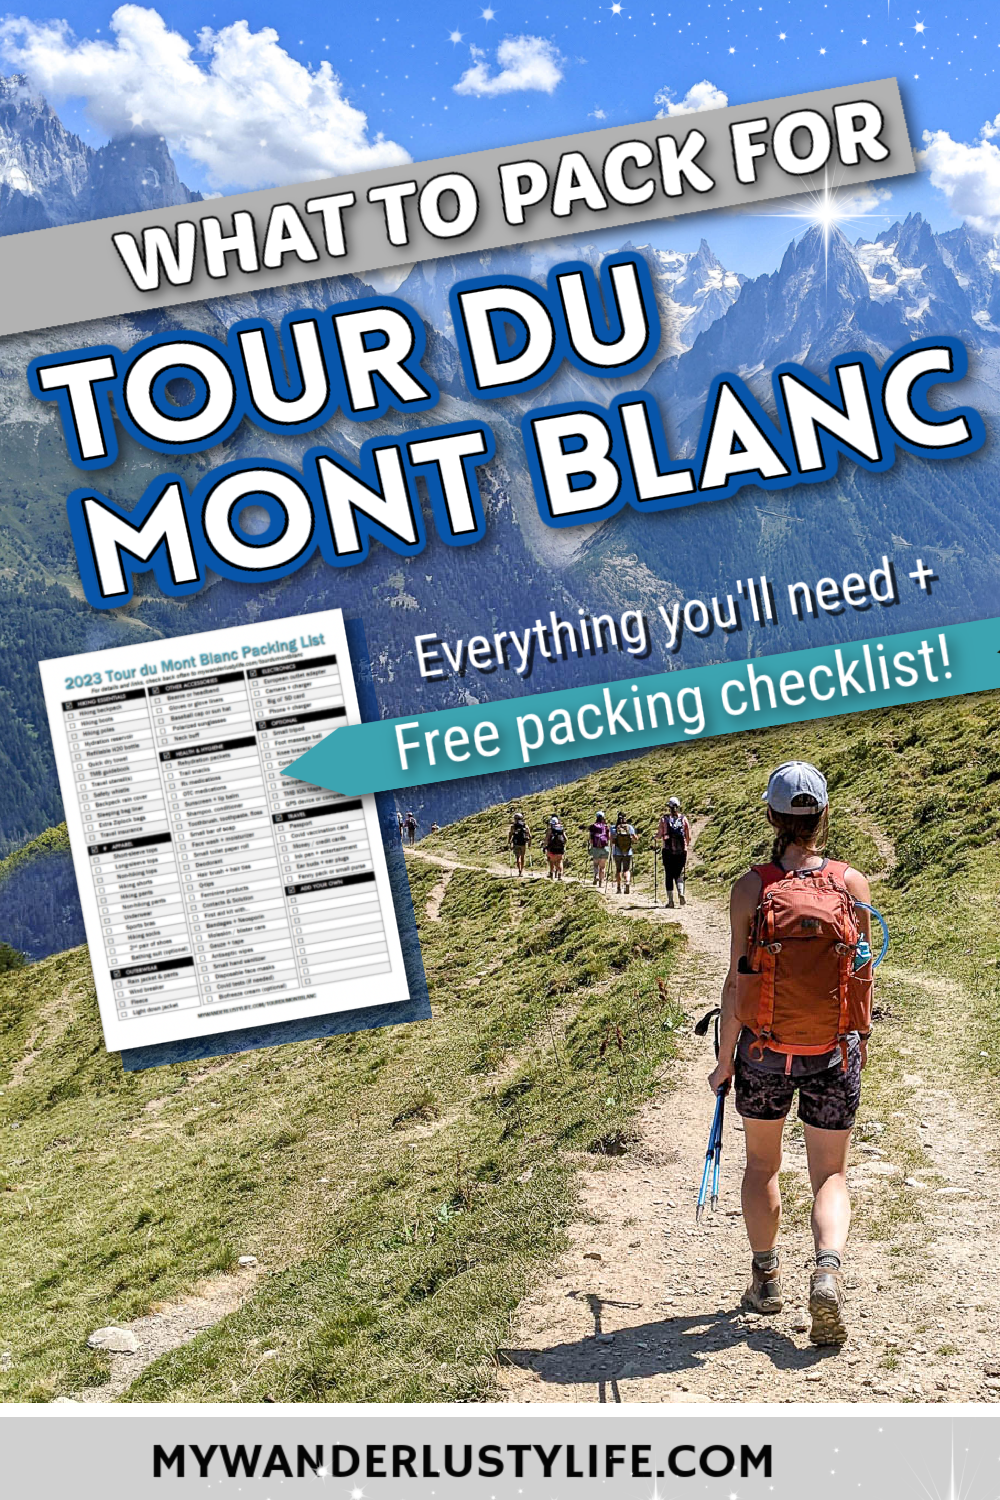 A Guide to Camping the Tour du Mont Blanc (TMB) – Sling Adventures